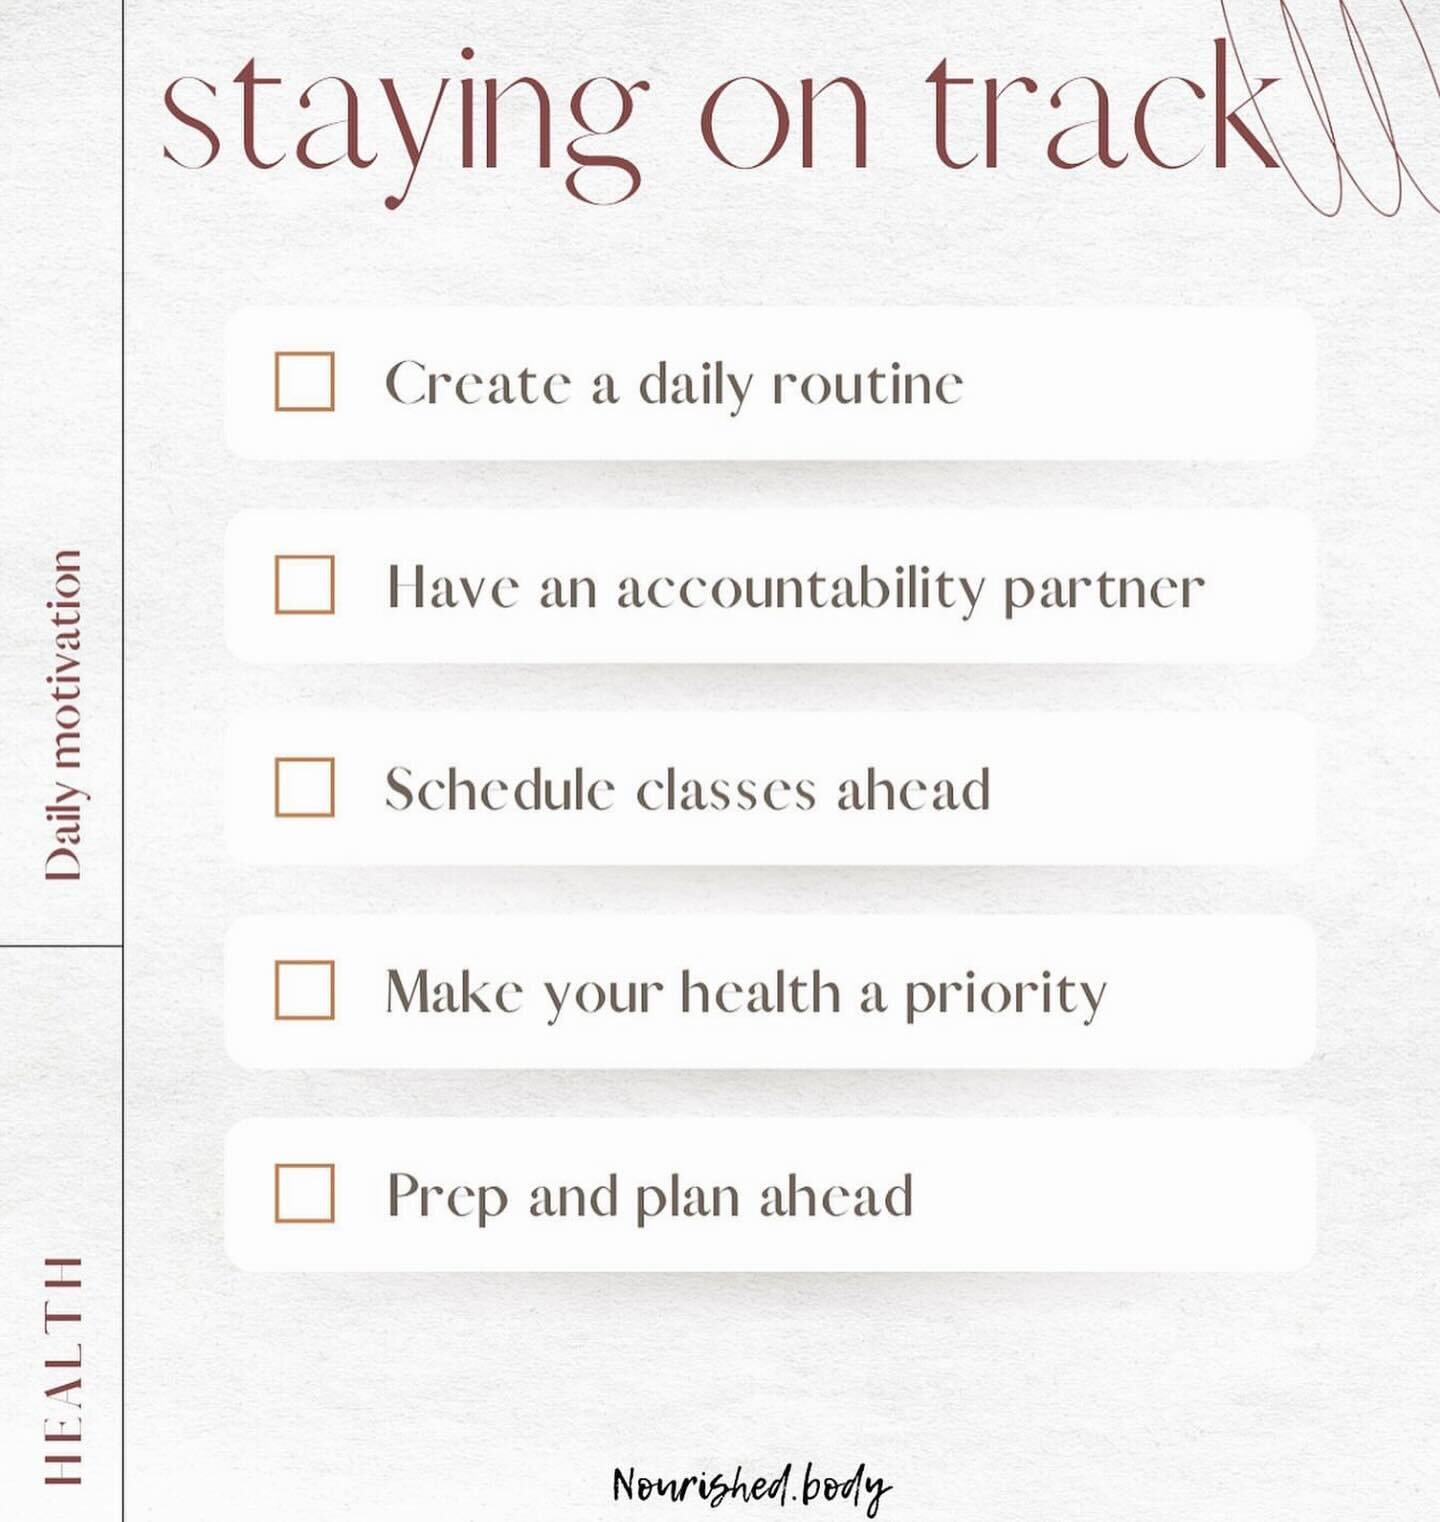 Staying on track can be tough!! Here are some tips to keep you focused!

✔️ Create a daily routine: whether it&rsquo;s waking up at 6am and working out or waking up at 8am and drinking a glass a water, forming a daily routine will help!

✔️ Have an a